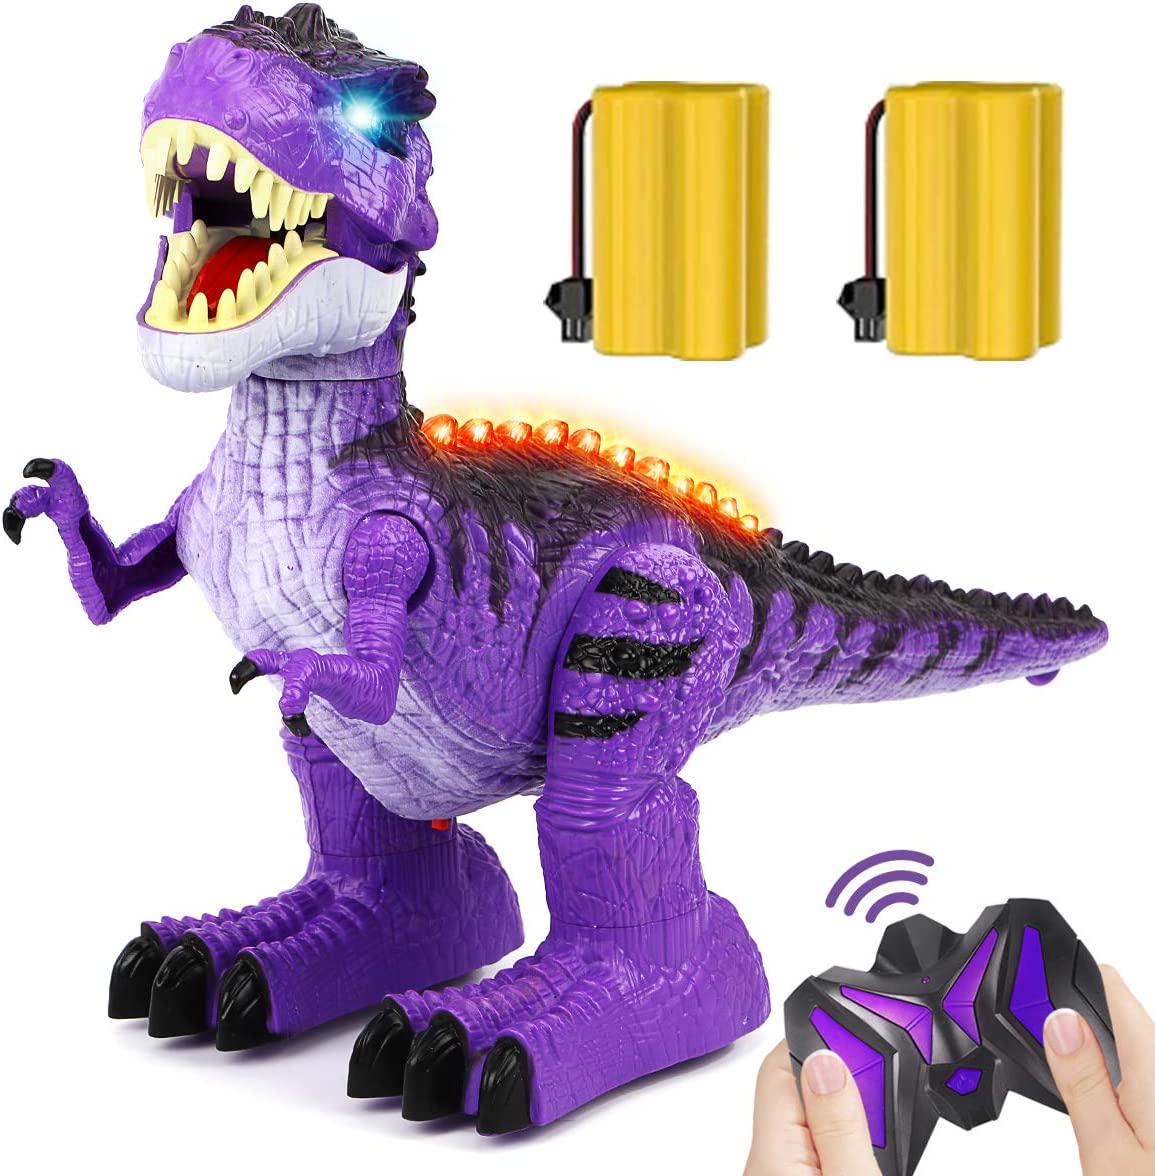 GILOBABY, GILOBABY Remote Control Dinosaur Toys with Light and Sound 2.4Ghz RC Simulation Walking Dinosaur Robot for Kids Boys Girls 3 4 5 6 7 8 9+